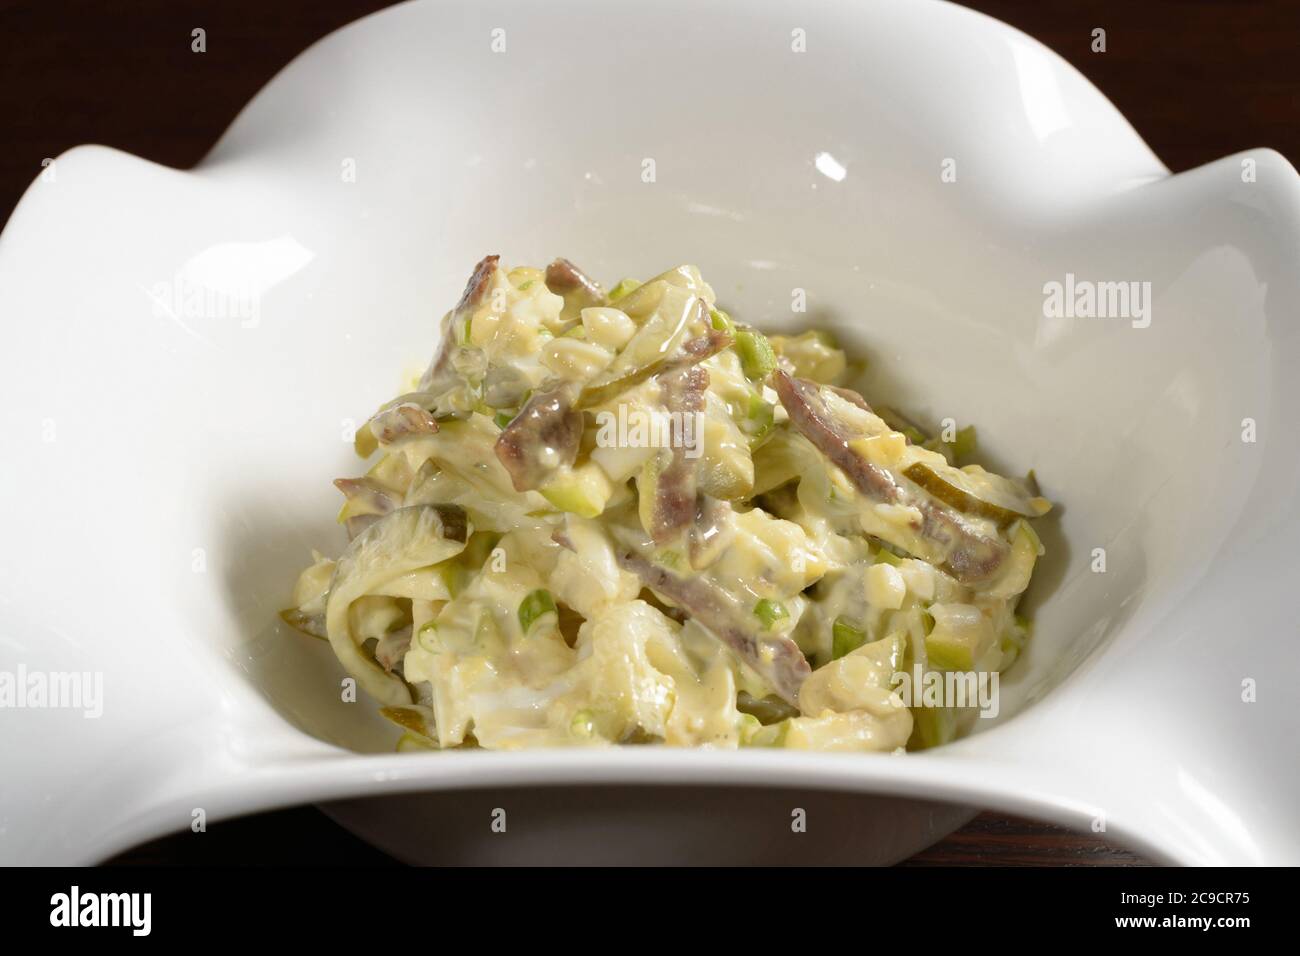 Salad served in the restaurant bacon with pickles seasoned with mayonnaise, close up. Photos for restaurant and cafe menus Stock Photo